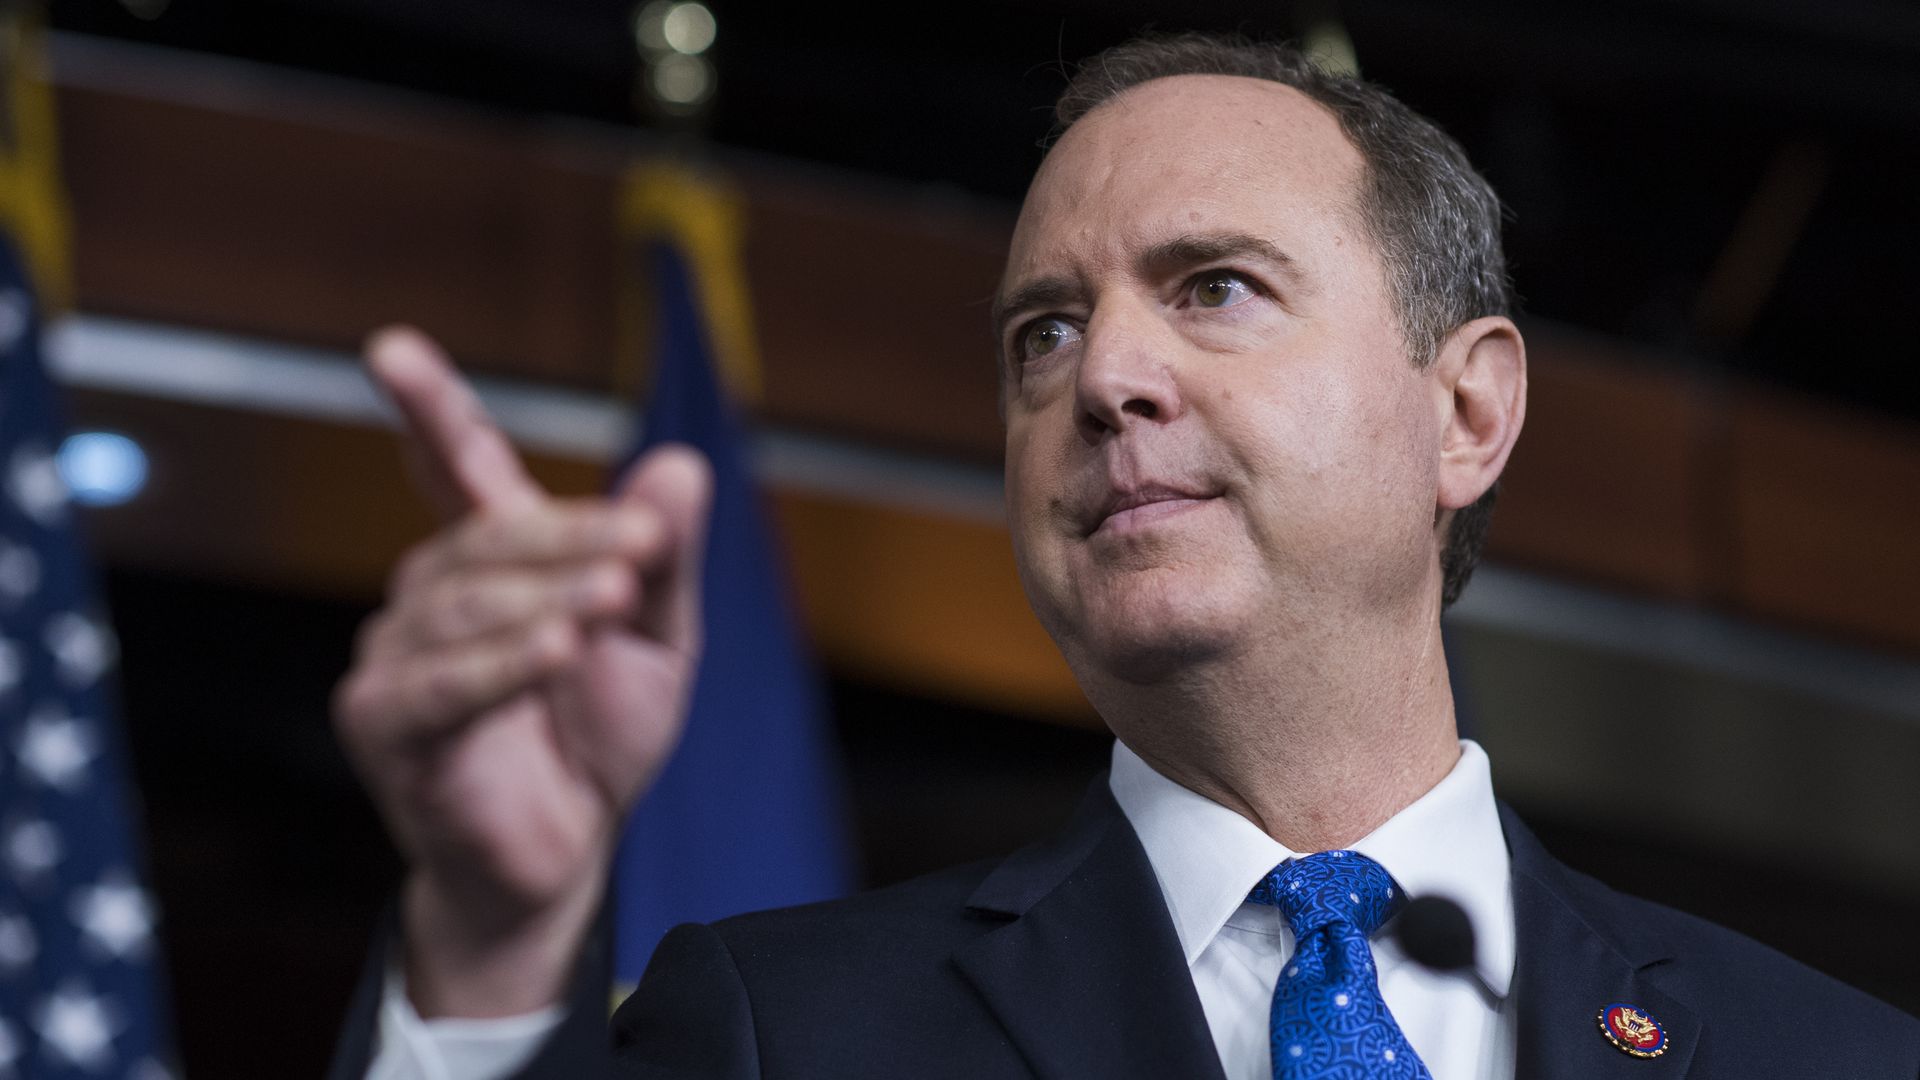 Adam Schiff, D-Calif., conducts news conferenceon the transcript of a phone call between President Trump and Ukrainian President Volodymyr Zelensky on Wednesday, September 25,